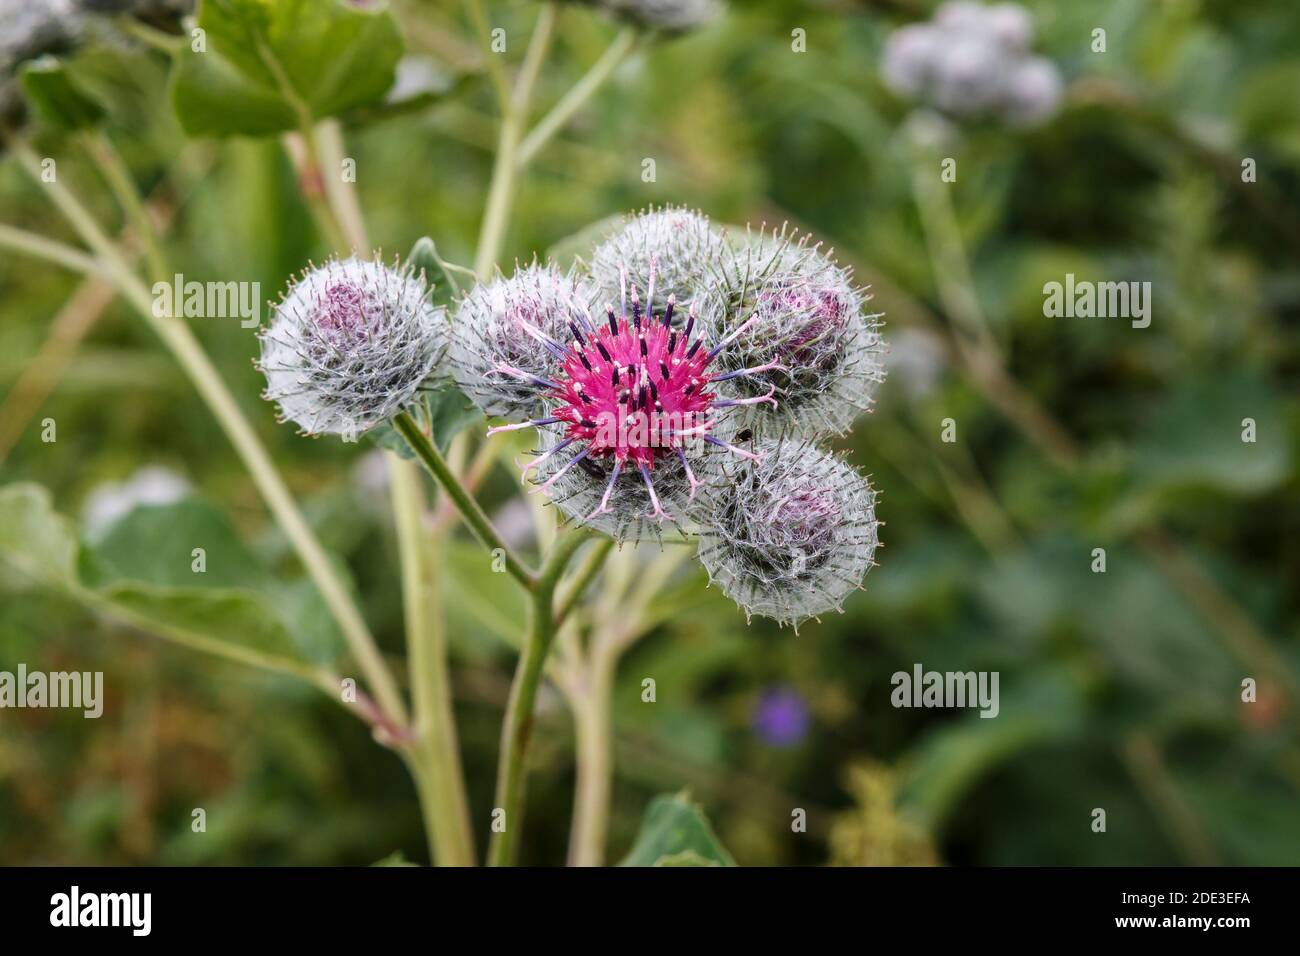 Blooming medicinal plant burdock. Arctium lappa commonly called greater burdock. Stock Photo